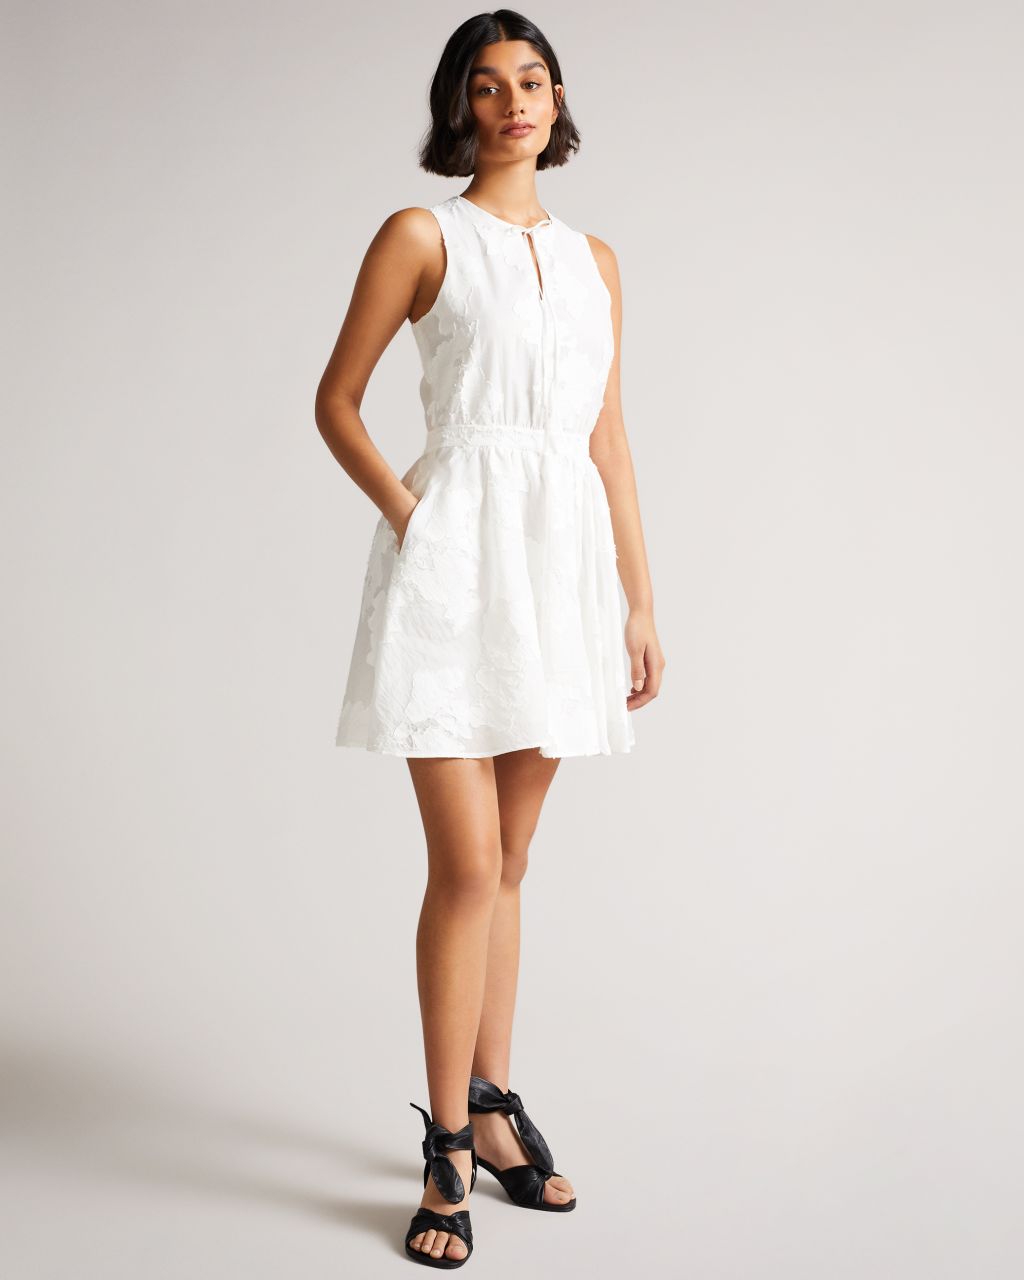 Ted Baker Women's Flippy Mini Dress With Neck Tie in White, Maylee, Cotton